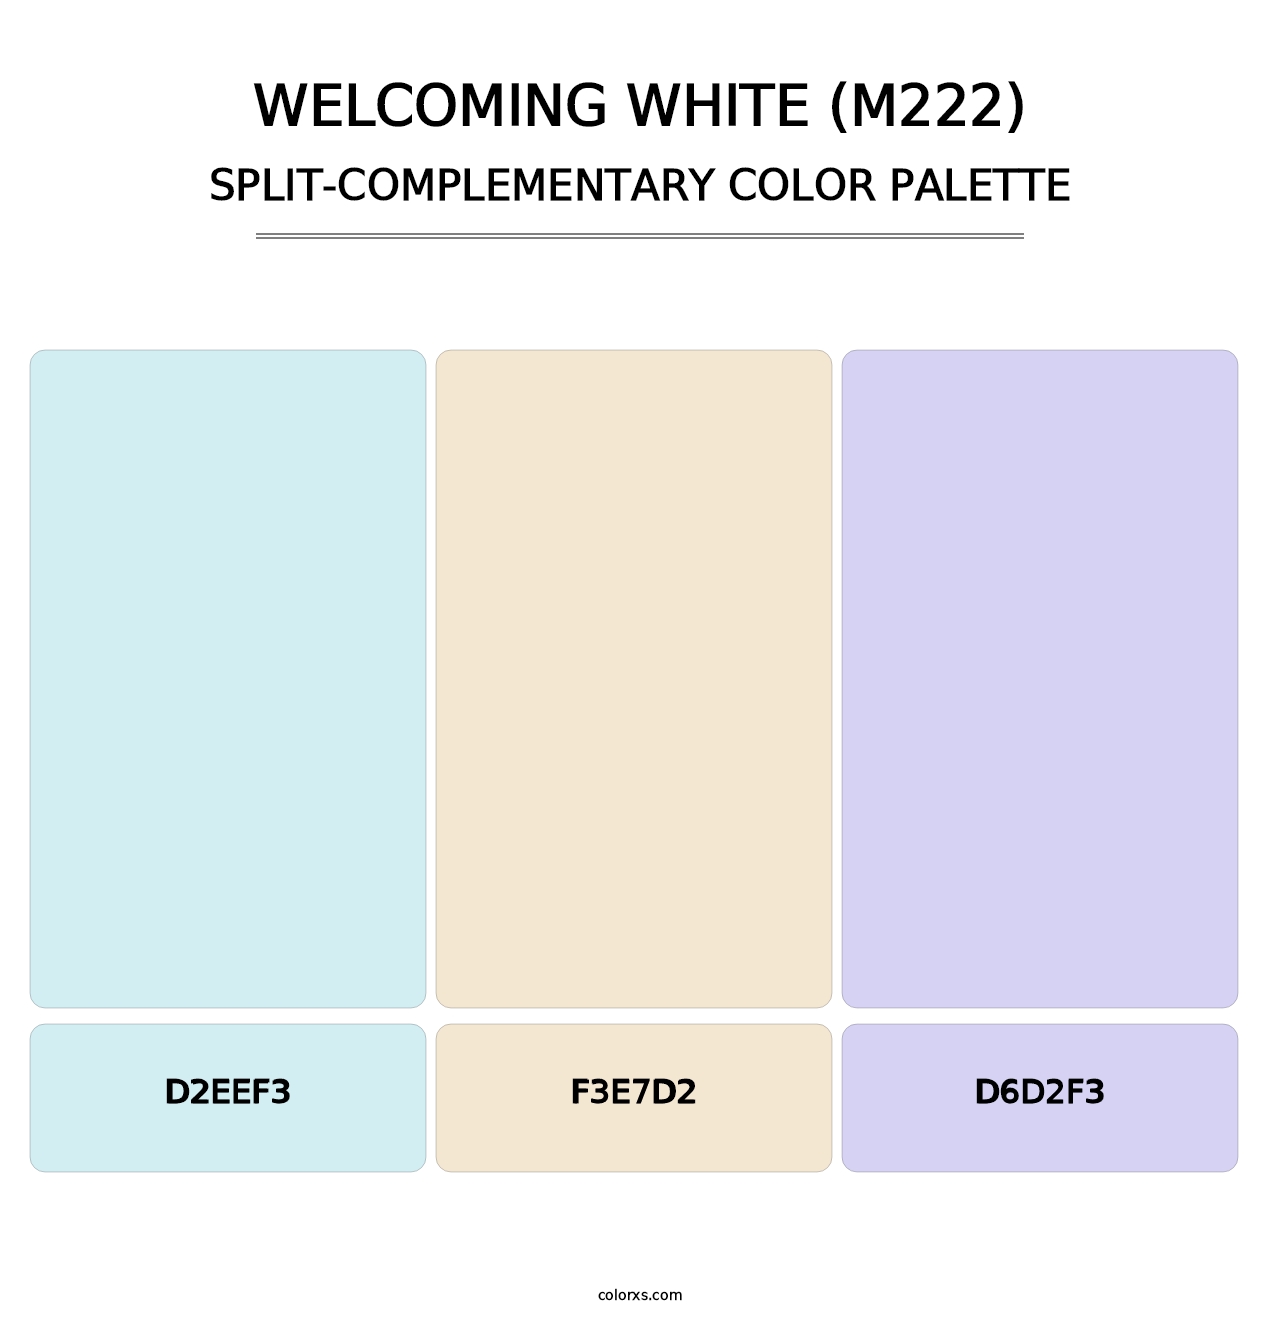 Welcoming White (M222) - Split-Complementary Color Palette